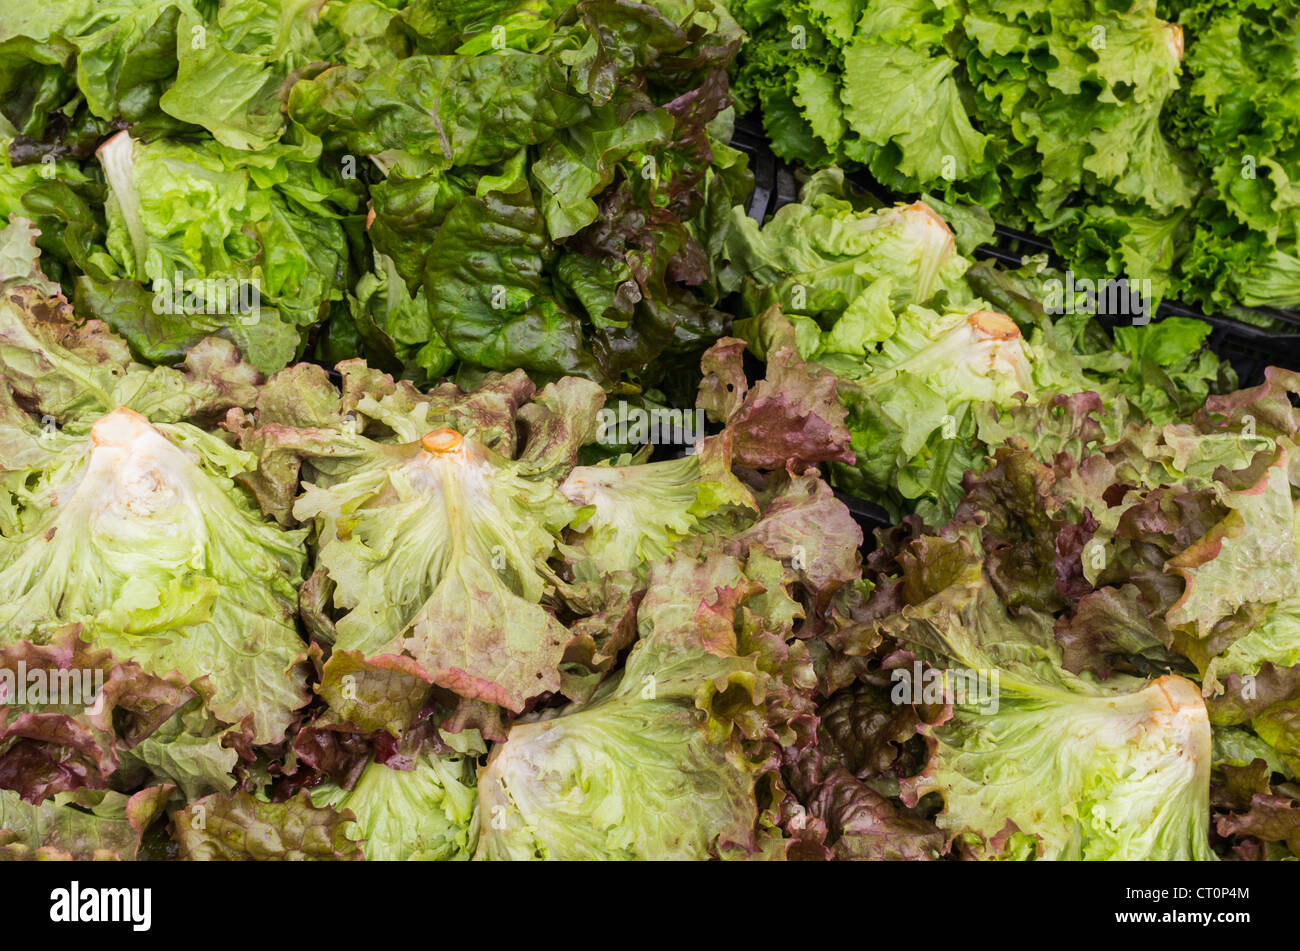 Fresh red and green leaf lettuce ready for sale at the farmers market Stock Photo